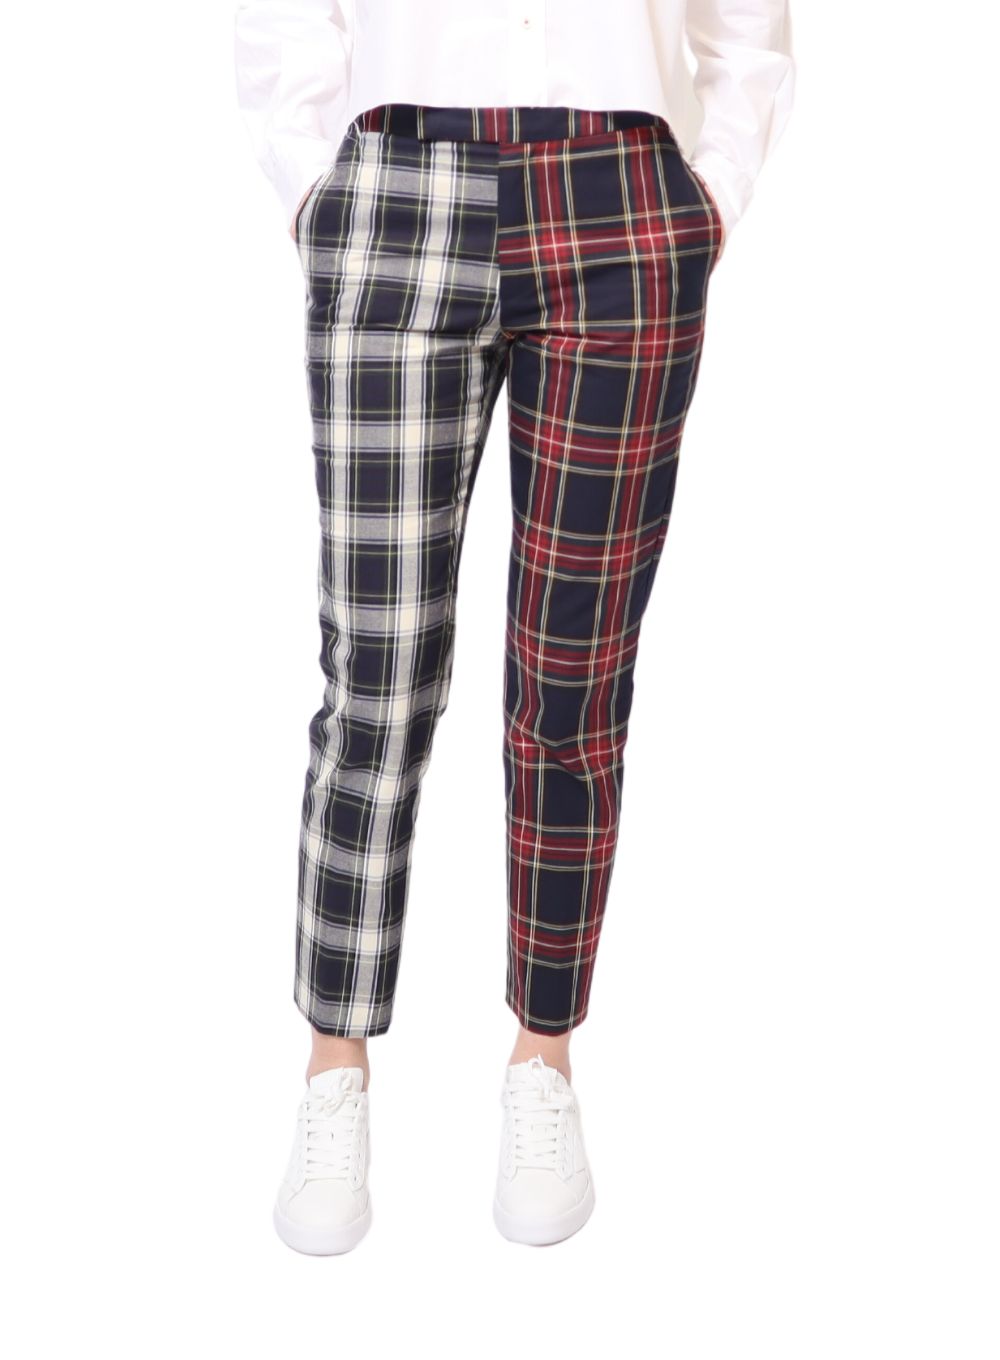 Plus Size Black White Houndstooth Checkered Pants Online in India | Amydus